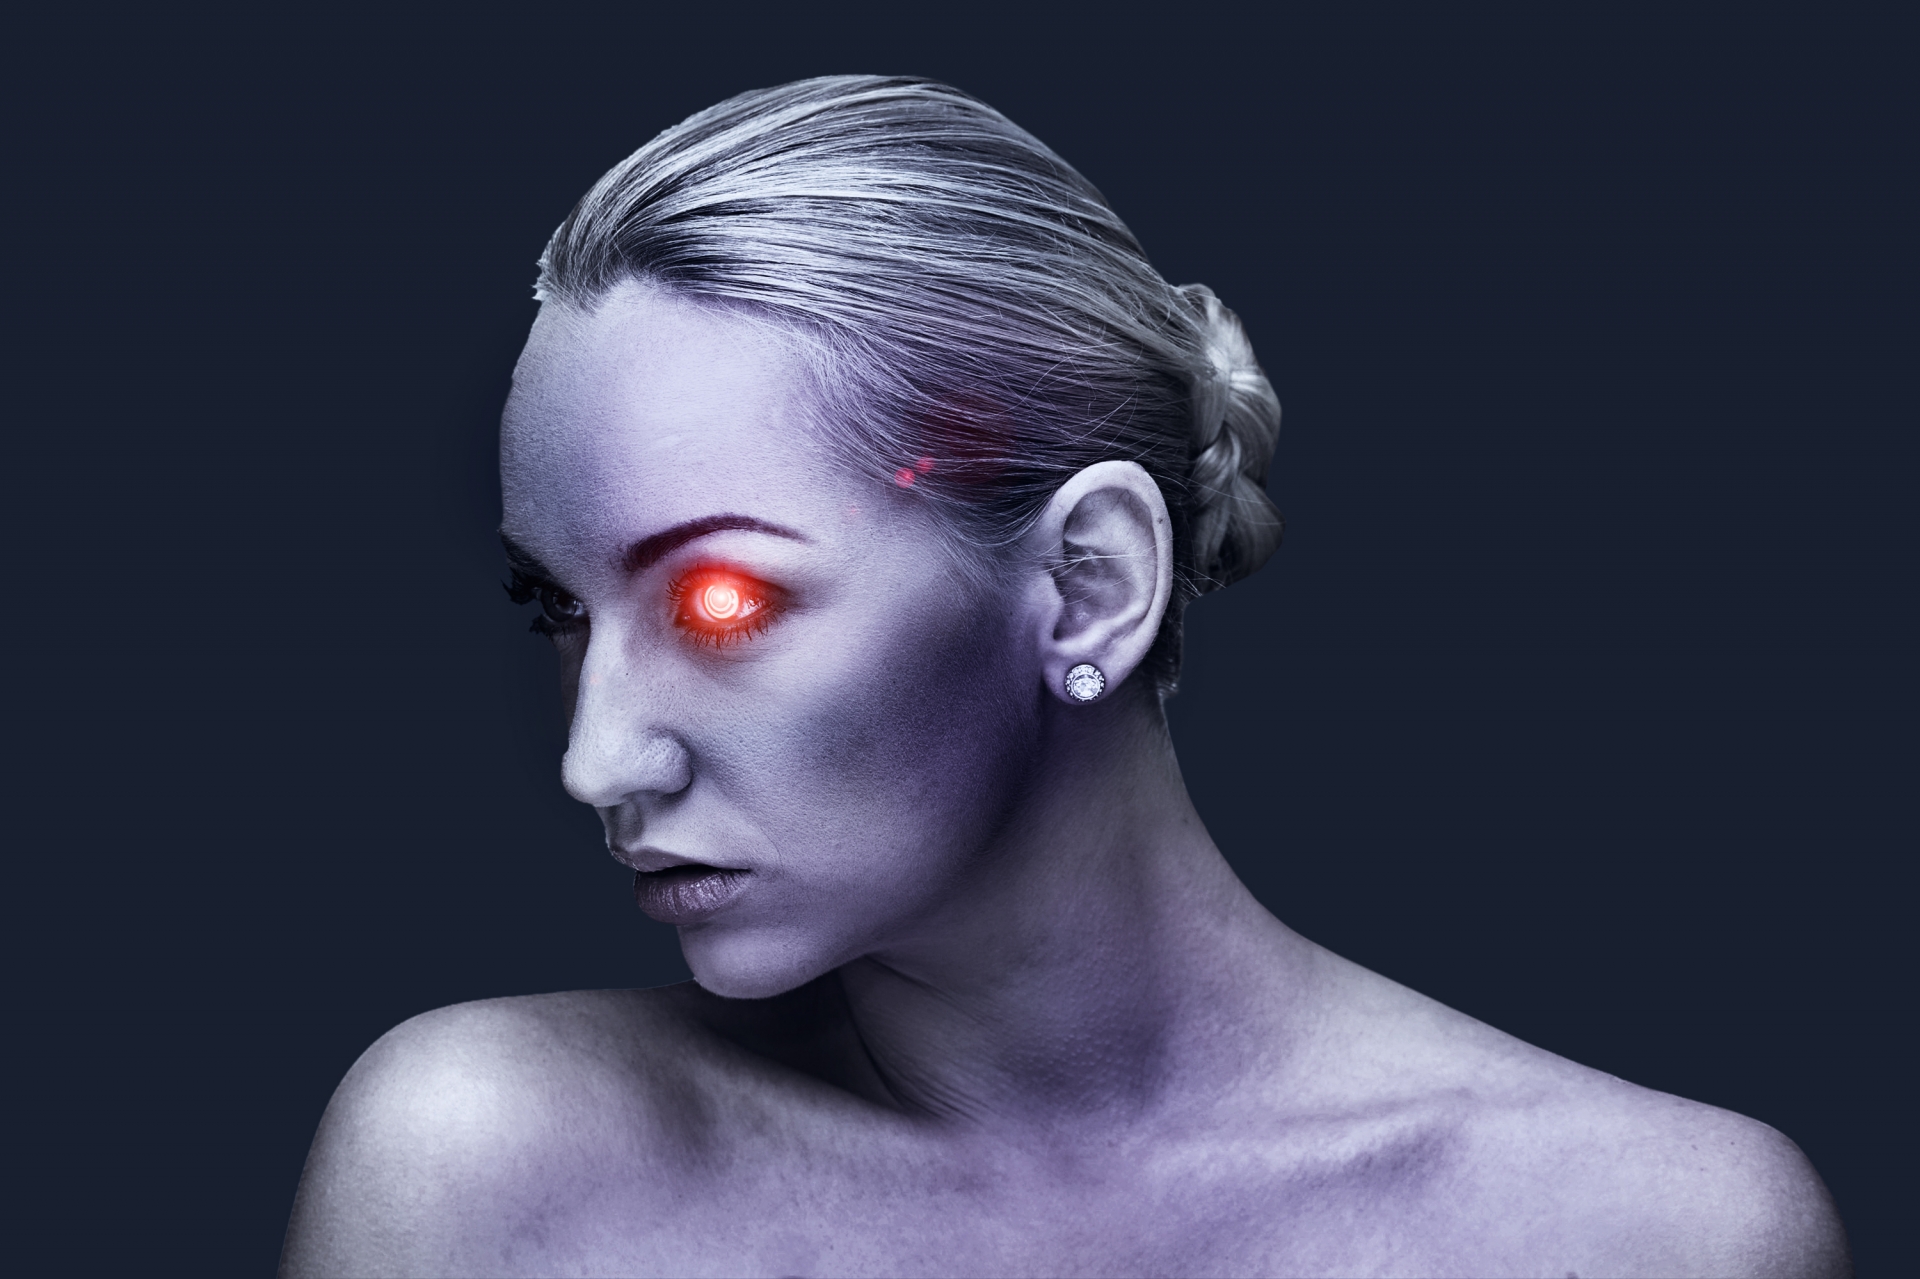 A woman with one of her eyes emitting a red light